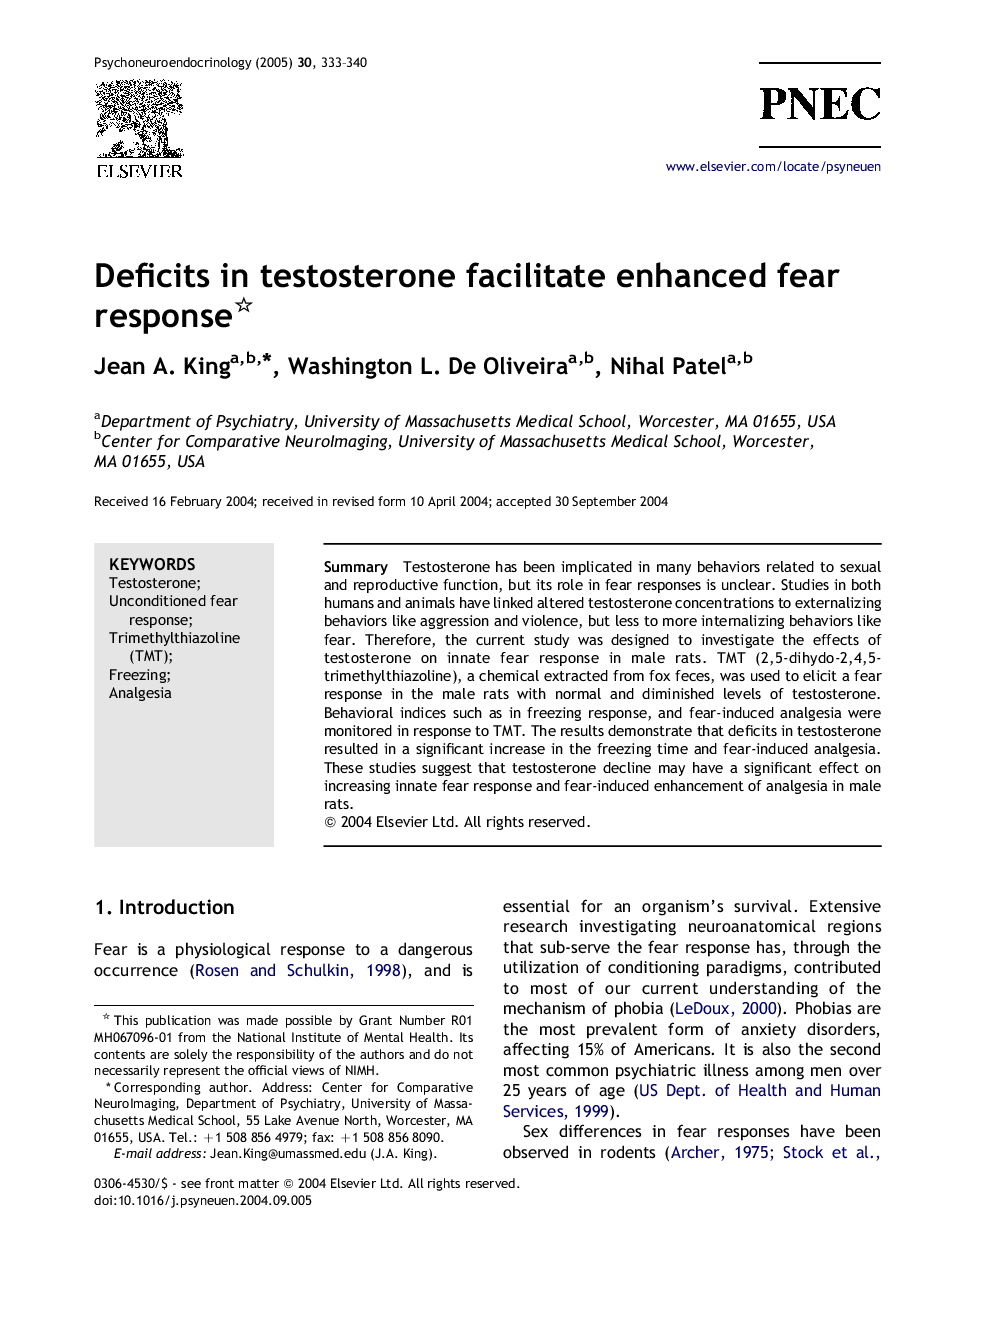 Deficits in testosterone facilitate enhanced fear response